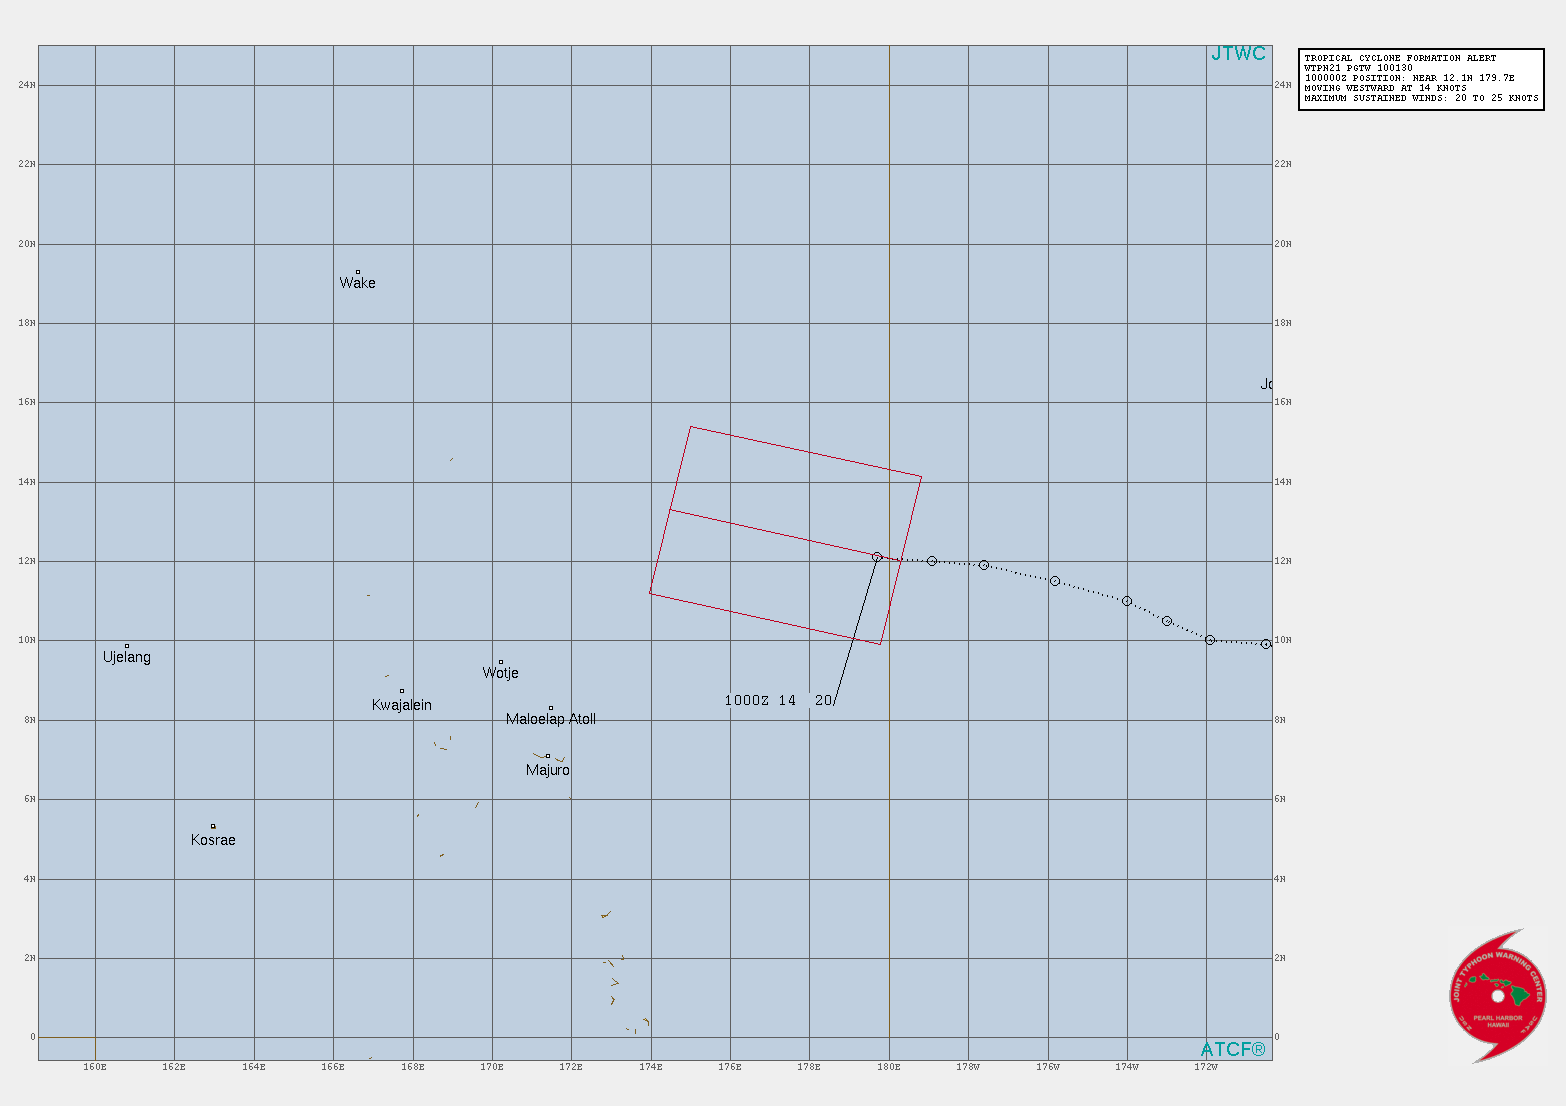 INVEST 91C. TROPICAL CYCLONE FORMATION ALERT ISSUED AT 10/0130UTC.FORMATION OF A SIGNIFICANT TROPICAL CYCLONE IS POSSIBLE WITHIN 130 NM EITHER SIDE OF A LINE FROM 12.0N 179.7W TO 13.3N 174.5E WITHIN THE NEXT 12 TO 24 HOURS. AVAILABLE DATA DOES NOT JUSTIFY ISSUANCE OF NUMBERED TROPICAL CYCLONE WARNINGS AT THIS TIME. WINDS IN THE AREA ARE ESTIMATED TO BE 20 TO 25 KNOTS. METSAT IMAGERY AT 100100Z INDICATES THAT A CIRCULATION CENTER IS LOCATED NEAR 12.1N 179.7E. THE SYSTEM IS MOVING WESTWARD AT 26 KM/H. 2. REMARKS: THE AREA OF CONVECTION (INVEST 91C) IS LOCATED NEAR  12.1N 179.7E, APPROXIMATELY 1370KM EAST-NORTHEAST OF KWAJALEIN.  ANIMATED ENHANCED INFRARED (EIR) SATELLITE IMAGERY AND A 091641UTC  SSMIS 91GHZ MICROWAVE IMAGE DEPICT DEEP CONVECTION OFFSET TO THE  EASTERN PERIPHERY OF AN EXPOSED, WELL-DEFINED LOW LEVEL CIRCULATION  CENTER (LLCC). ENVIRONMENTAL ANALYSIS INDICATES A FAVORABLE  ENVIRONMENT FOR DEVELOPMENT CHARACTERIZED BY RADIAL OUTFLOW, LOW VERTICAL WIND SHEAR (VWS) AND WARM (28-29C) SEA SURFACE  TEMPERATURE.MAXIMUM SUSTAINED SURFACE WINDS  ARE ESTIMATED AT 20 TO 25 KNOTS. MINIMUM SEA LEVEL PRESSURE IS  ESTIMATED TO BE NEAR 1006 MB. THE POTENTIAL FOR THE DEVELOPMENT OF A  SIGNIFICANT TROPICAL CYCLONE WITHIN THE NEXT 24 HOURS IS HIGH.